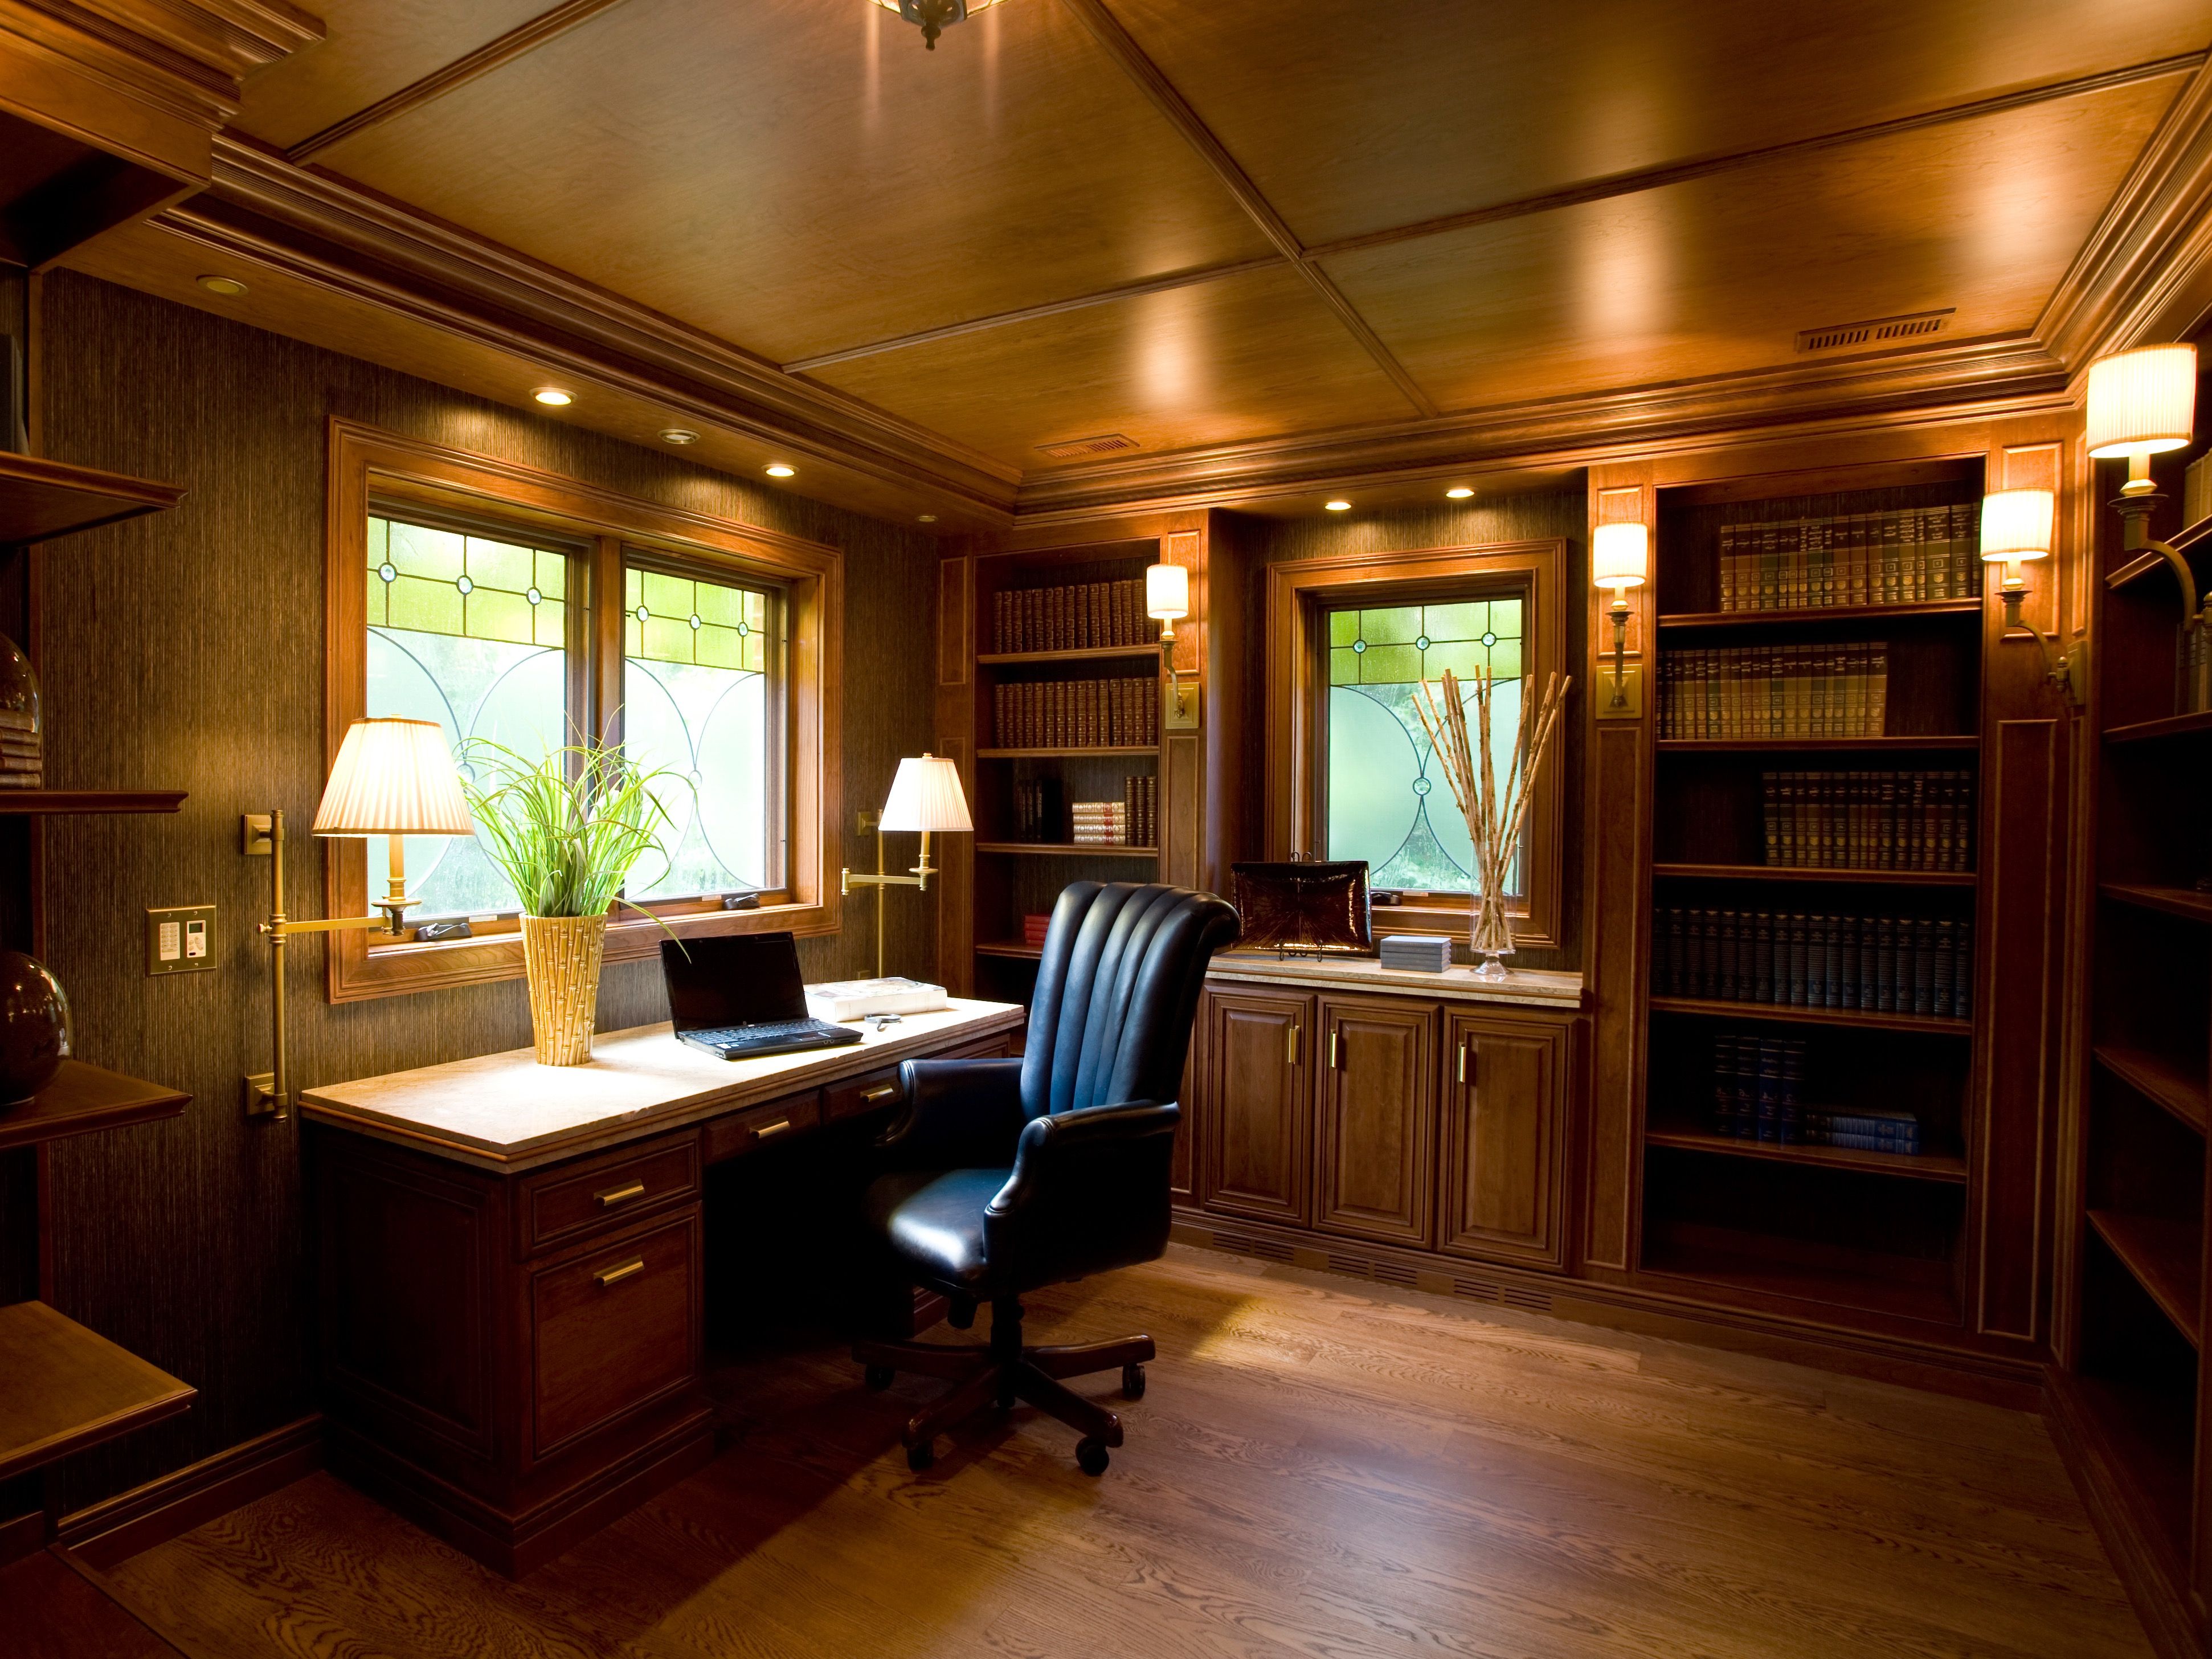 Wood Craftsman Style Home Office With Wood Ceiling And Built In Wood Cabinets (View 14 of 15)